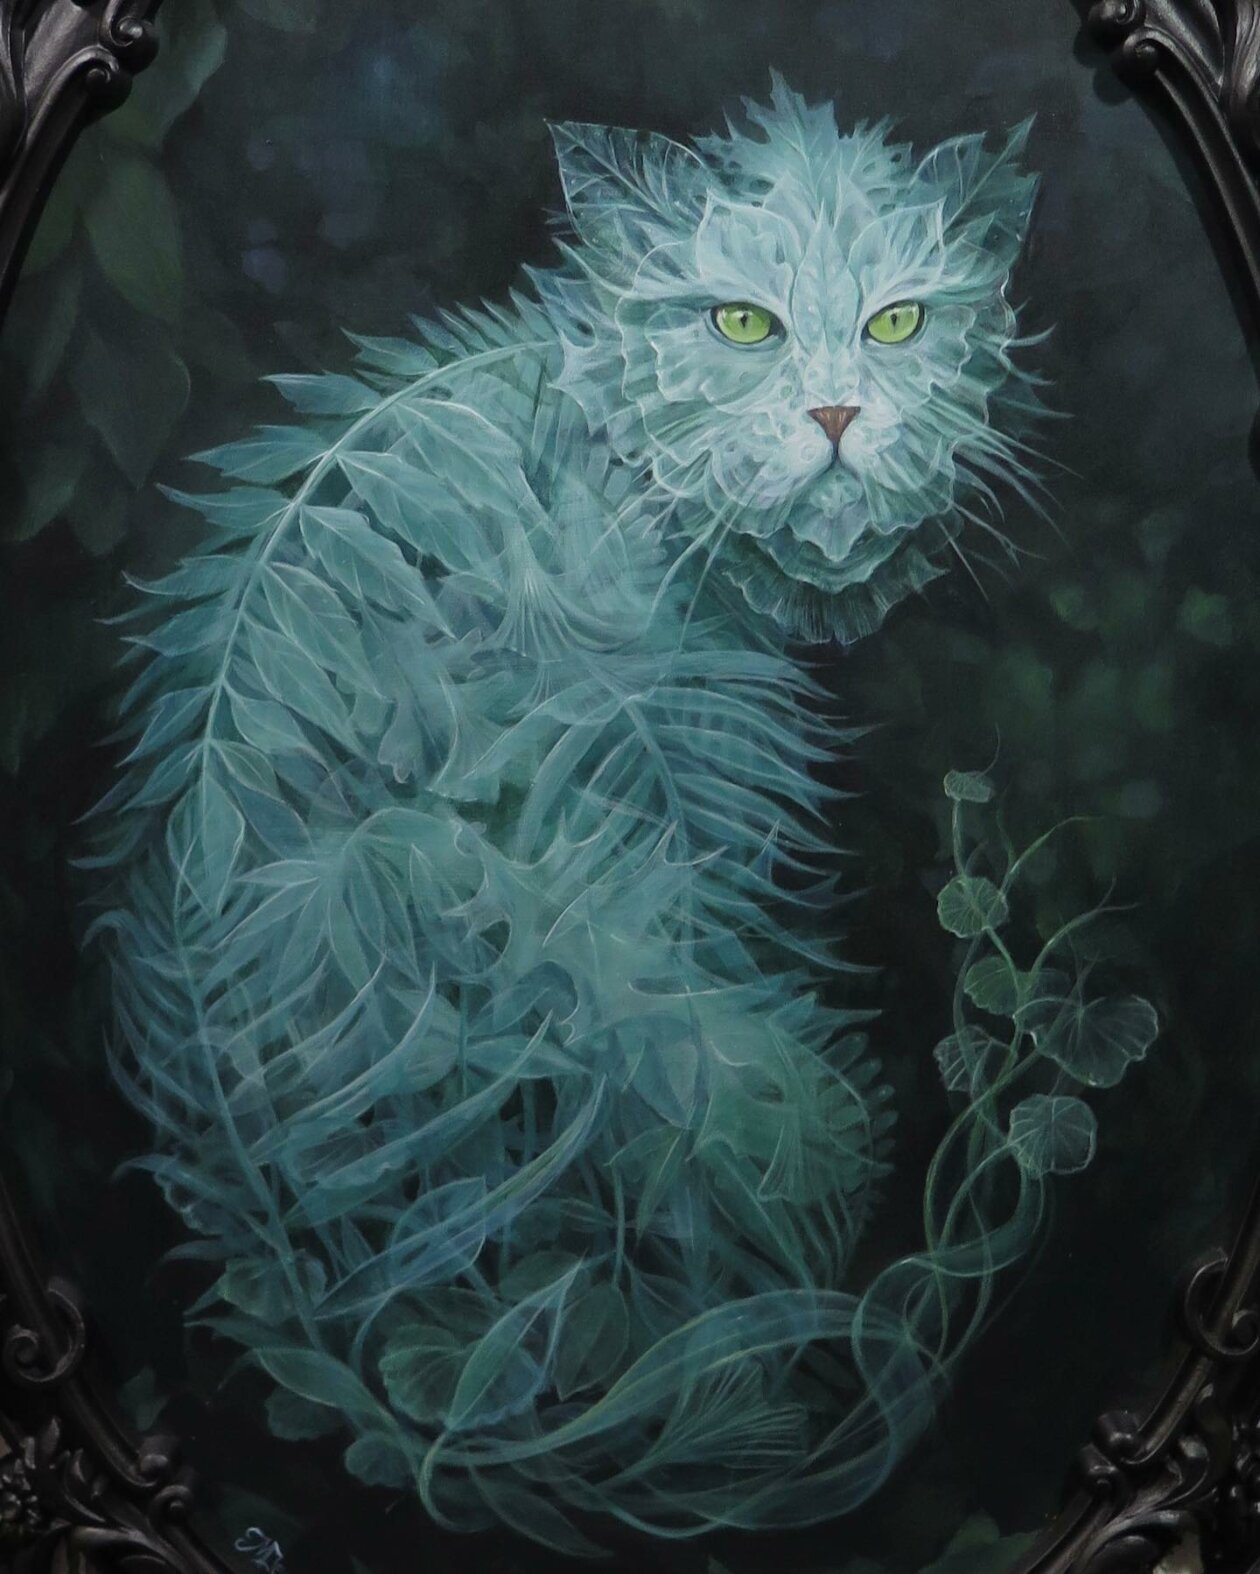 Surrealistic Portrait Paintings Of Animals Composed Of Translucent Botanics By Molly Devlin (10)